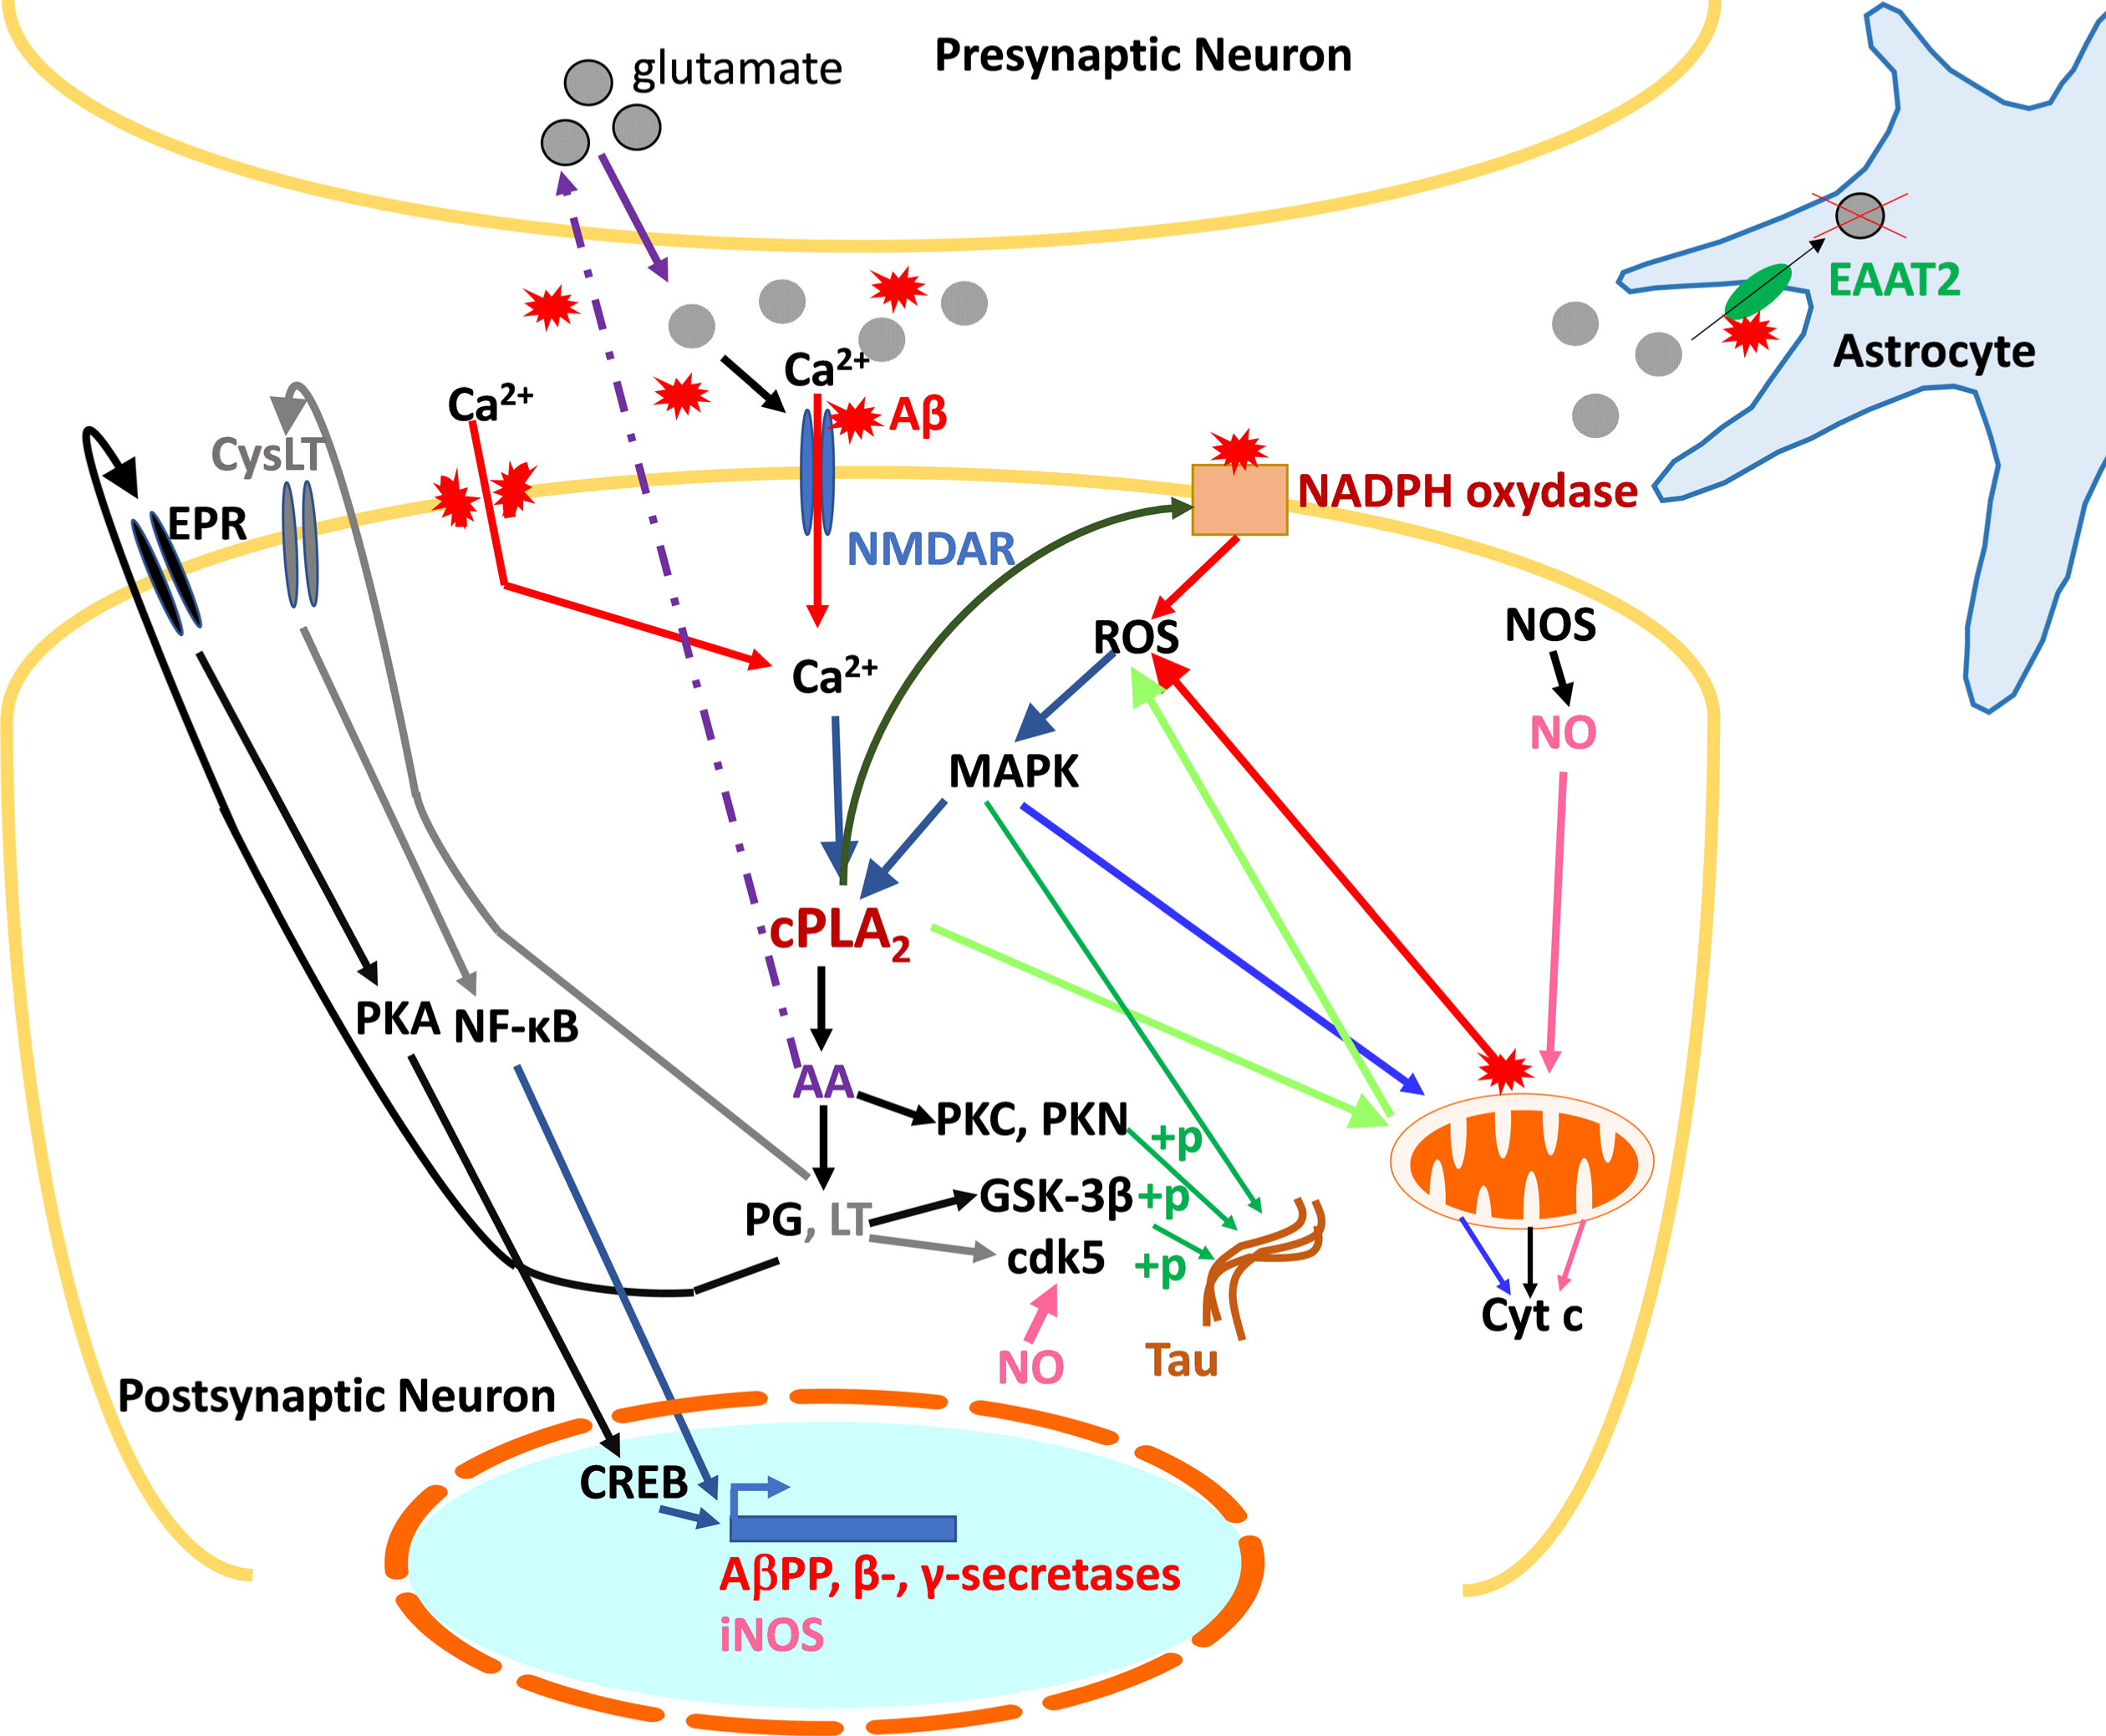 Summary diagram of the role of cPLA2-IVA in the pathological mechanisms of AD at the neuronal level. cPLA2-IVA activated in response to excitotoxicity and the presence of Aβ contribute to the generation of inflammatory mediators involved in the expression of AβPP and secretases, thus participating in amyloid pathology, and in the phosphorylation of tau. The generated Aβ is then responsible for activating cPLA2-IVA. Concomitantly, through its action on membrane phospholipids, cPLA2-IVA contributes to the generation of ROS, harmful to the neuron, which in turn exacerbate its activation via the activation of MAPK. cPLA2-IVA is thus at the center of a vicious circle contributing to neuronal death.+p, phosphorylation; AA, arachidonic acid; Aβ, amyloid peptide; AβPP, amyloid-β protein precursor; Ca2+, calcium; cdk5, Cyclin Dependent Kinase 5; cPLA2, cytosolic phospholipase A2; CREB, cAMP Response Element-binding protein; CysLT, leukotriene receptor (LT); Cyt c, cytochrome c; EAAT2, Excitatory amino acid transporter 2; EPR, prostaglandin receptor (PG); GSK-3β, Glycogen synthase kinase 3 beta; LT, leukotrienes; MAPK, mitogen-activated protein kinases; NF-κB, Nuclear Factor-kappa B; NMDAR, NMDA receptor; NOS, nitric oxide synthase (i: inducible); PG, prostaglandins; PKA/PKC/PKN, protein kinases A, C, and N; ROS, reactive oxygen species.